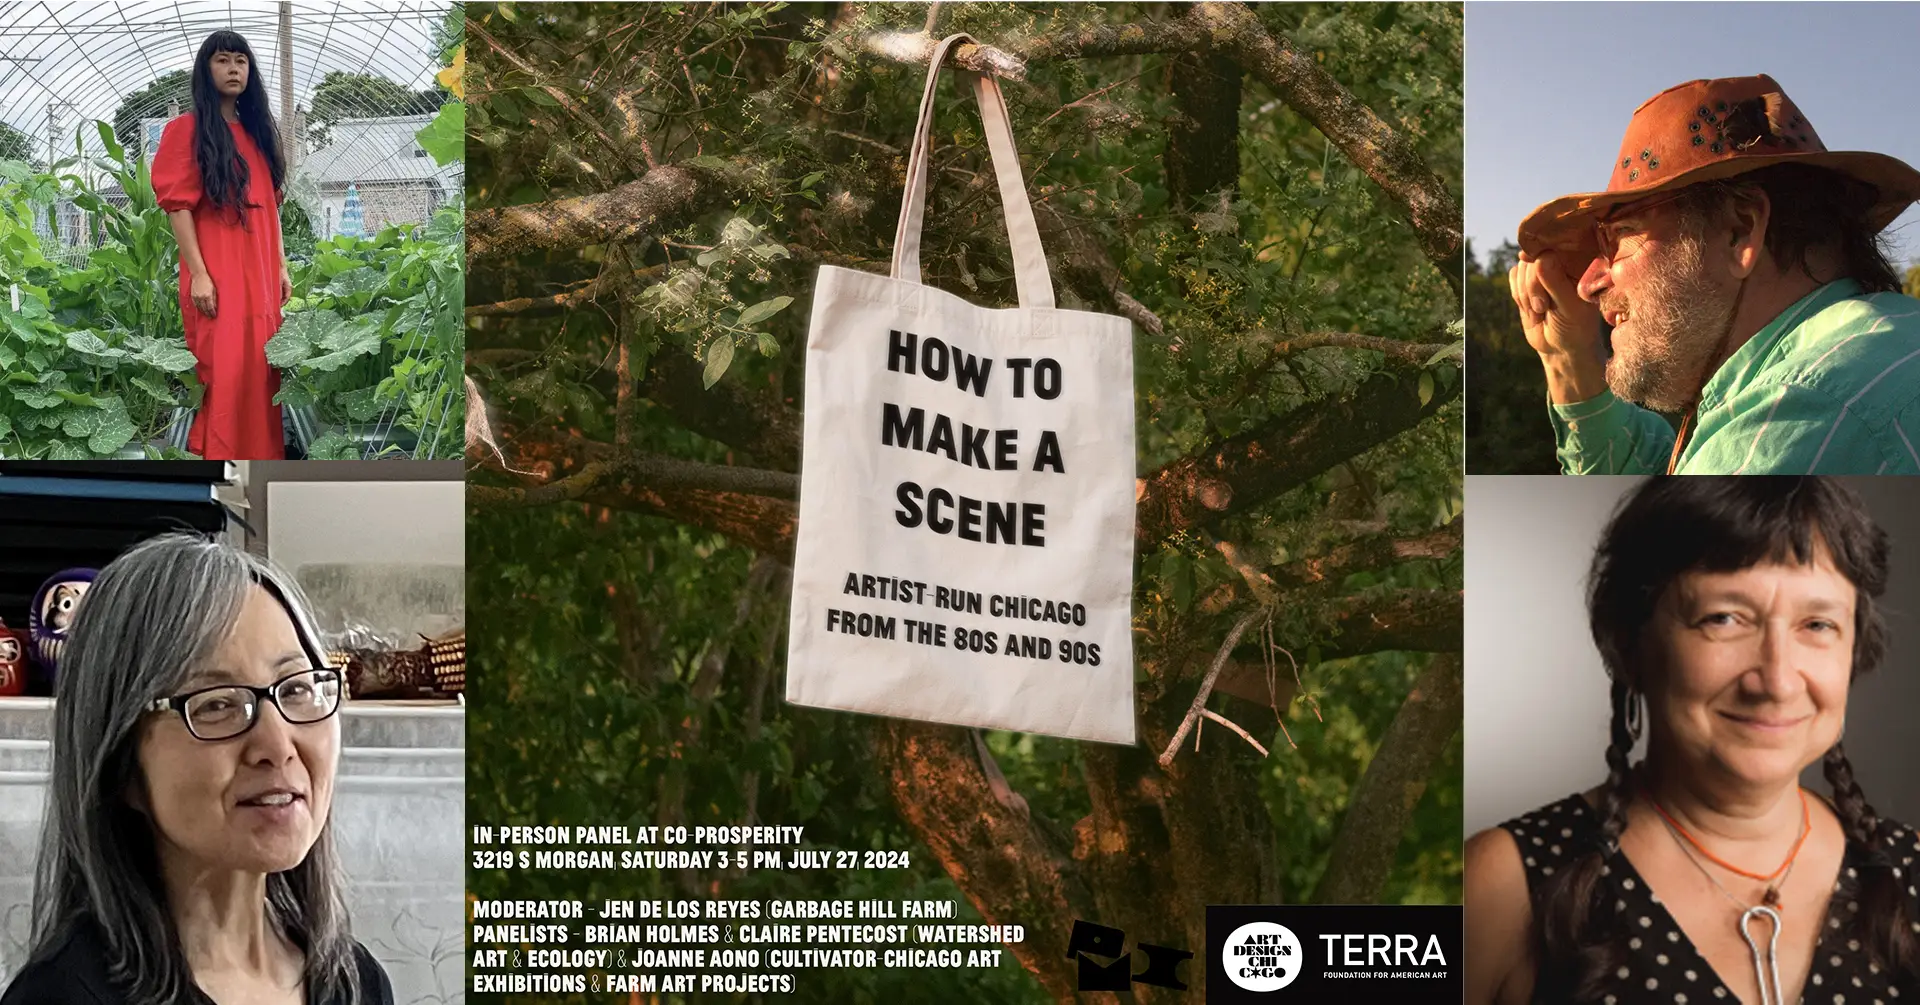 How To Make a Scene: Focus on Ecologies